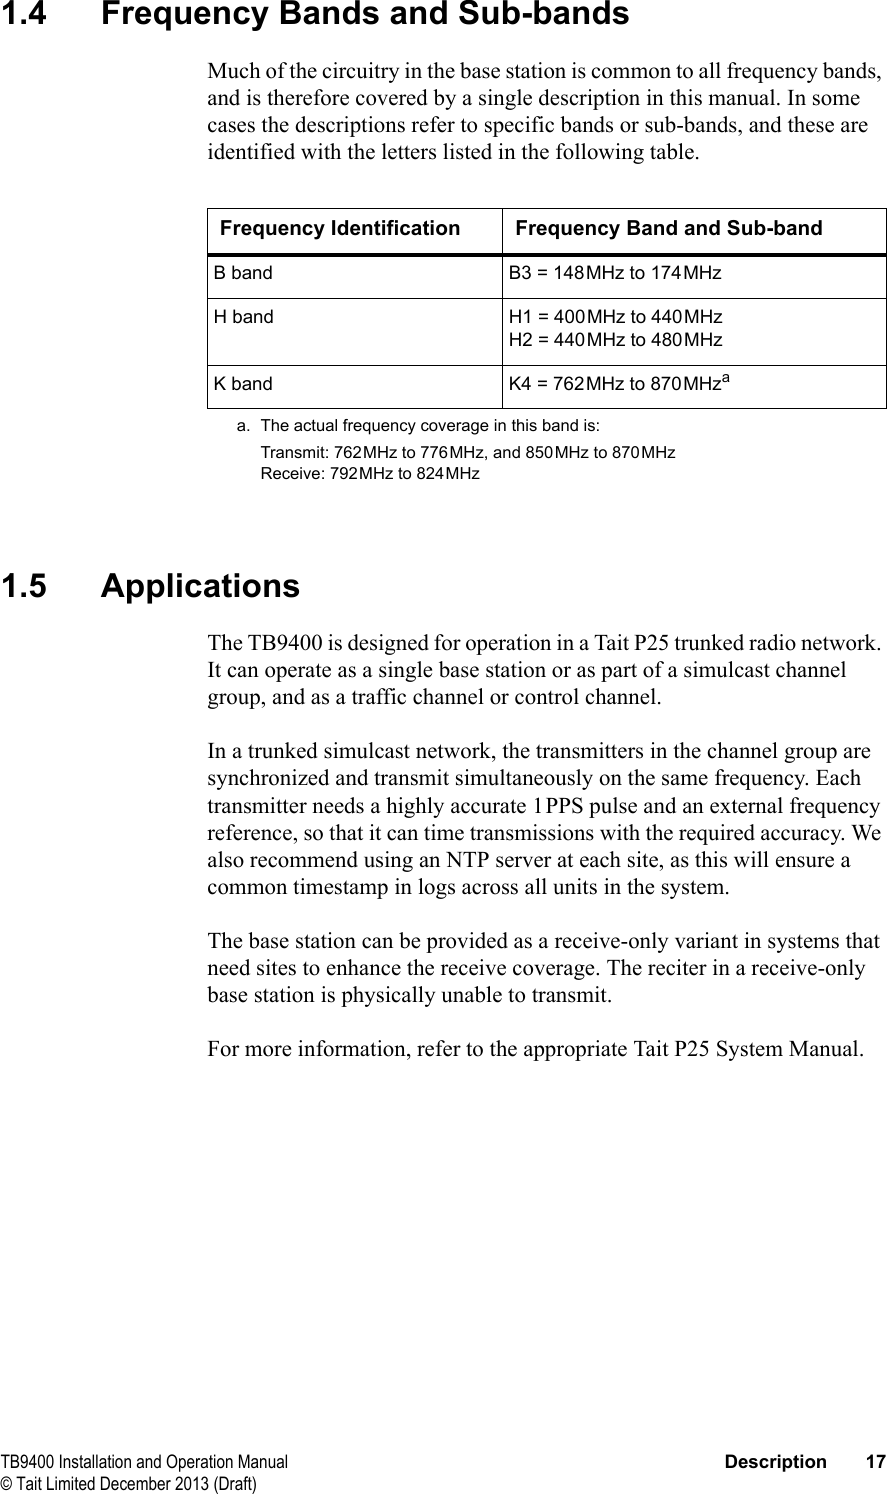  TB9400 Installation and Operation Manual Description 17© Tait Limited December 2013 (Draft)1.4 Frequency Bands and Sub-bandsMuch of the circuitry in the base station is common to all frequency bands, and is therefore covered by a single description in this manual. In some cases the descriptions refer to specific bands or sub-bands, and these are identified with the letters listed in the following table.1.5 ApplicationsThe TB9400 is designed for operation in a Tait P25 trunked radio network. It can operate as a single base station or as part of a simulcast channel group, and as a traffic channel or control channel. In a trunked simulcast network, the transmitters in the channel group are synchronized and transmit simultaneously on the same frequency. Each transmitter needs a highly accurate 1PPS pulse and an external frequency reference, so that it can time transmissions with the required accuracy. We also recommend using an NTP server at each site, as this will ensure a common timestamp in logs across all units in the system.The base station can be provided as a receive-only variant in systems that need sites to enhance the receive coverage. The reciter in a receive-only base station is physically unable to transmit.For more information, refer to the appropriate Tait P25 System Manual.Frequency Identification Frequency Band and Sub-bandB band B3 = 148MHz to 174MHzH band H1 = 400MHz to 440MHzH2 = 440MHz to 480MHzK band K4 = 762MHz to 870MHzaa. The actual frequency coverage in this band is:Transmit: 762MHz to 776MHz, and 850MHz to 870MHzReceive: 792MHz to 824MHz